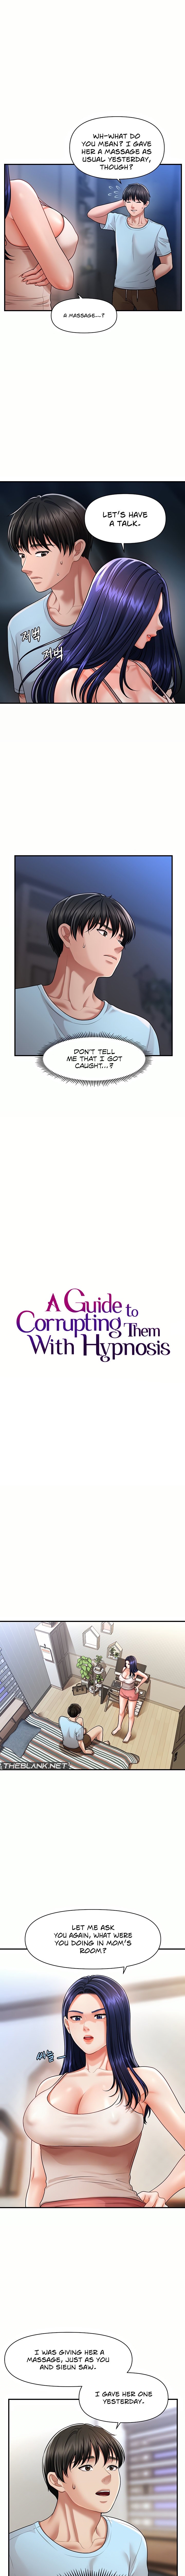 how-to-conquer-women-with-hypnosis-chap-5-1